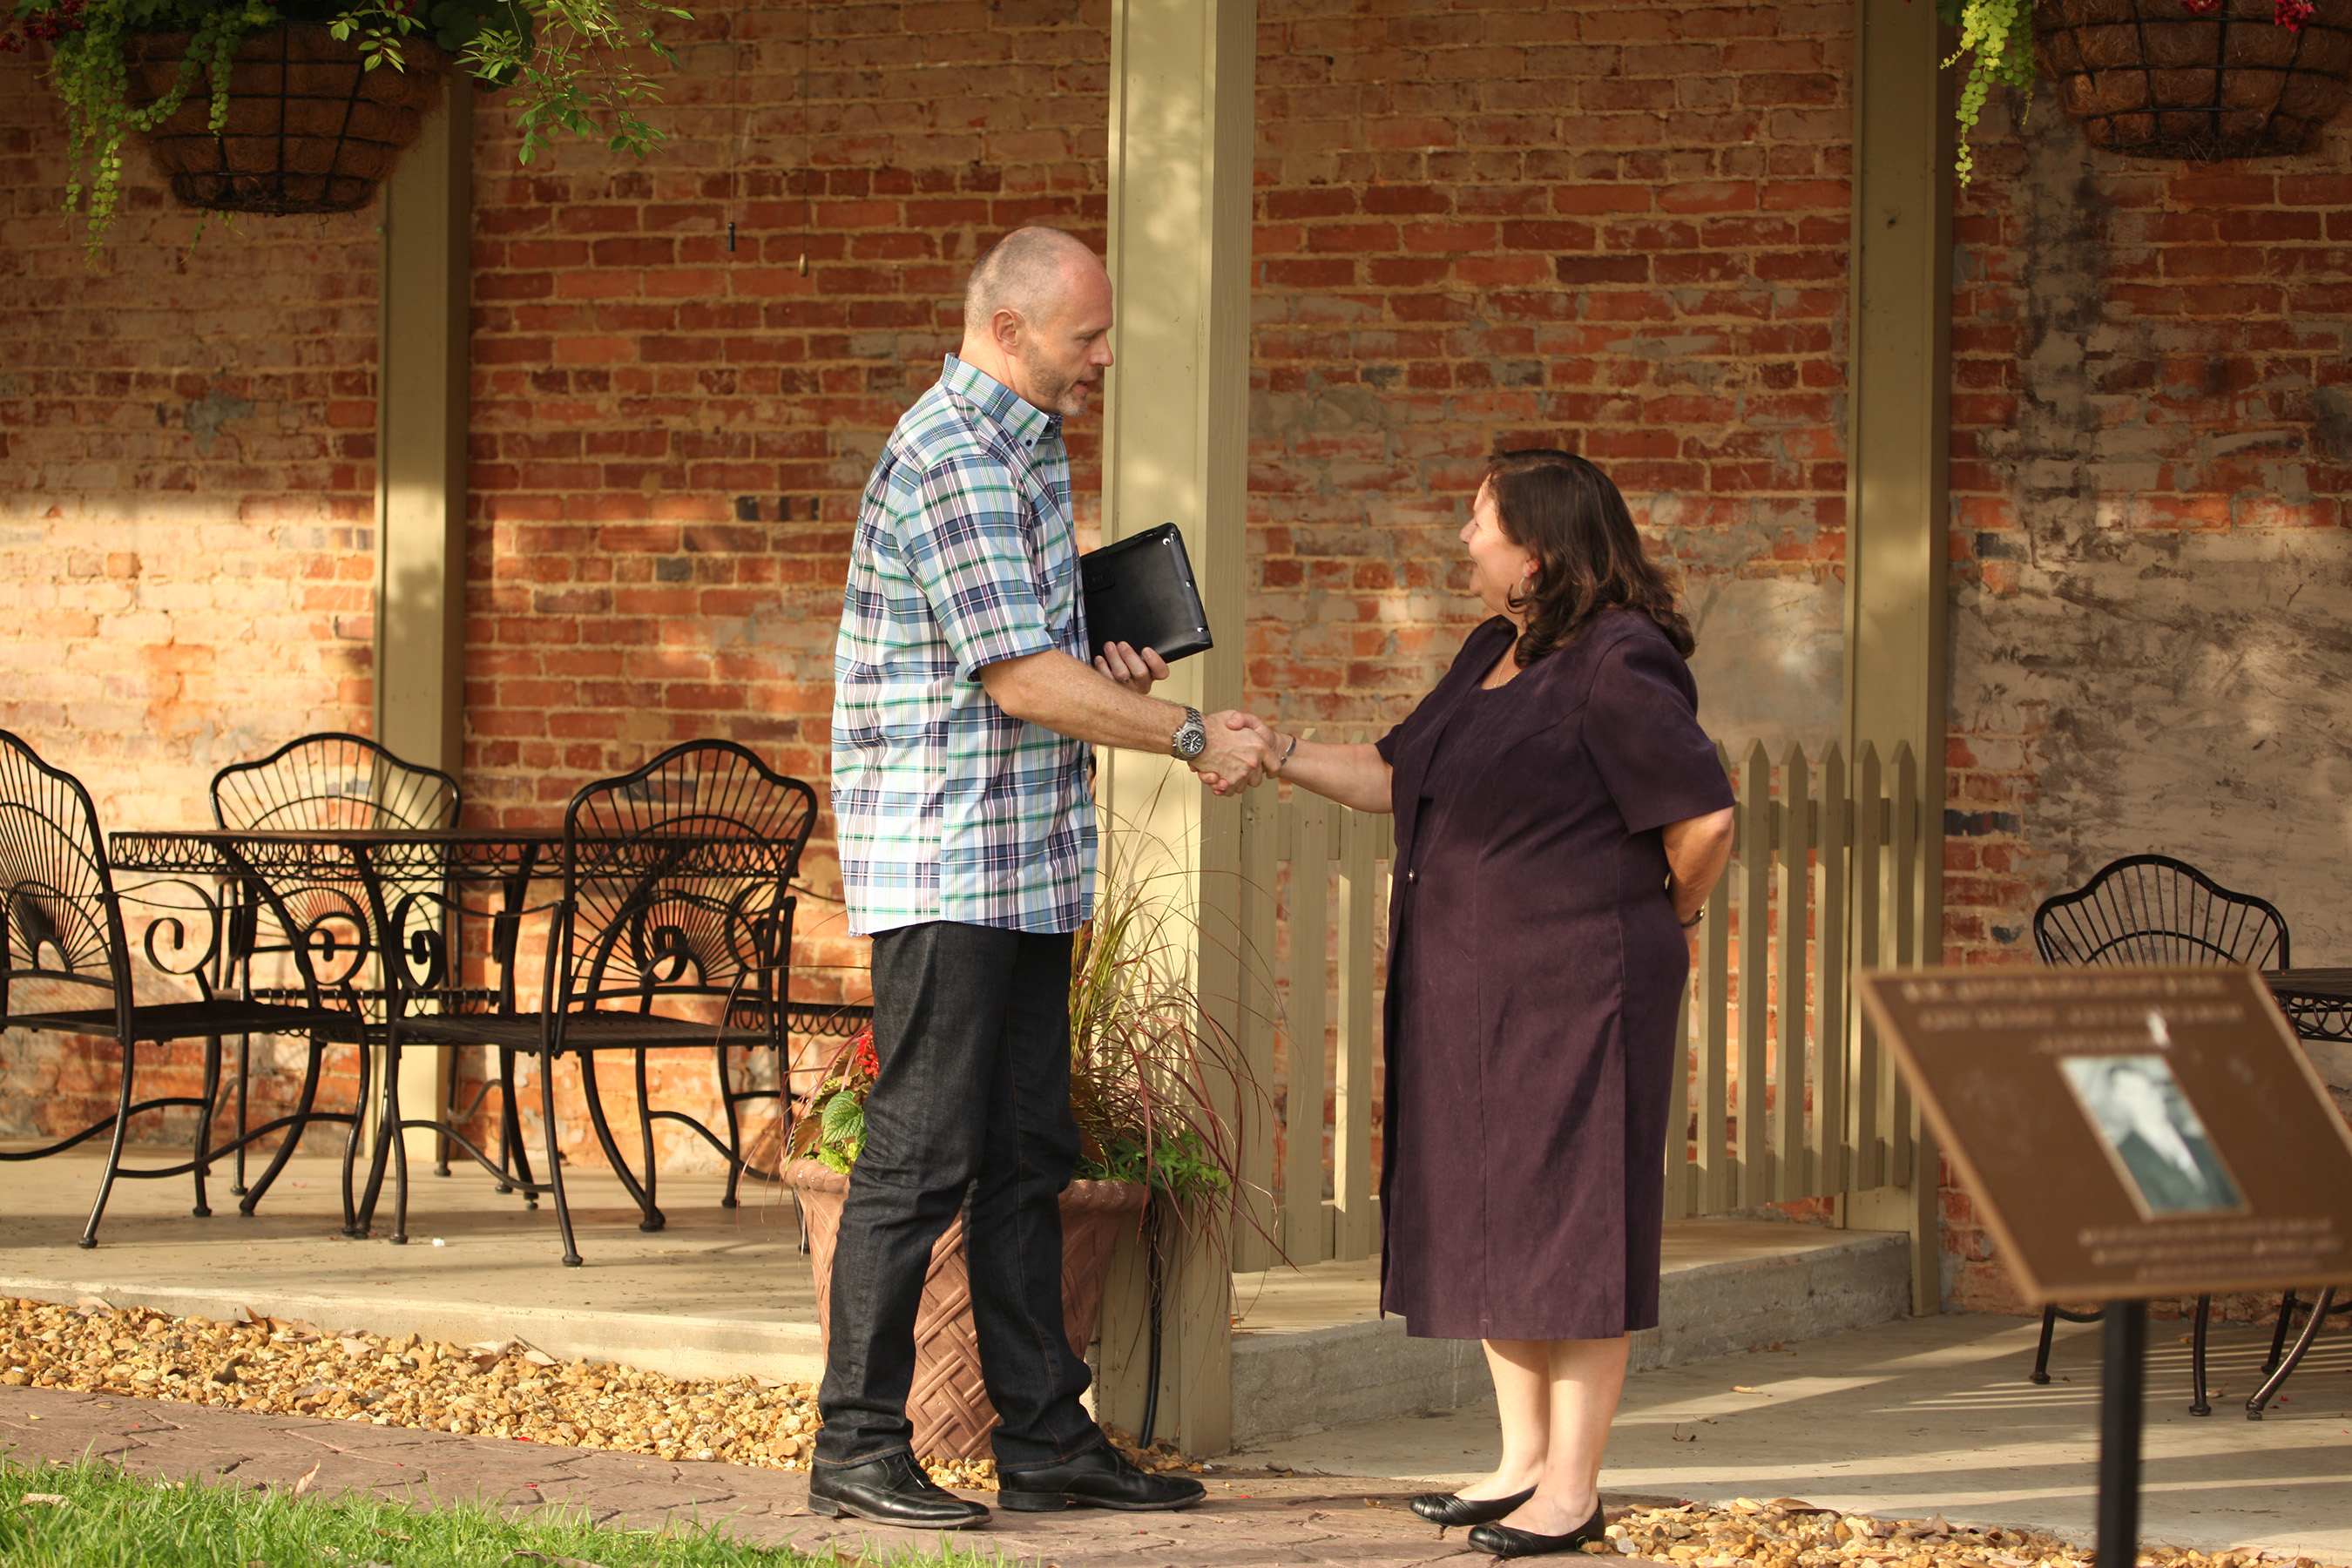 Resort Rescue: Perry, GA, New Perry Hotel – Host Shane Green greets Pattyn Johnson, owner